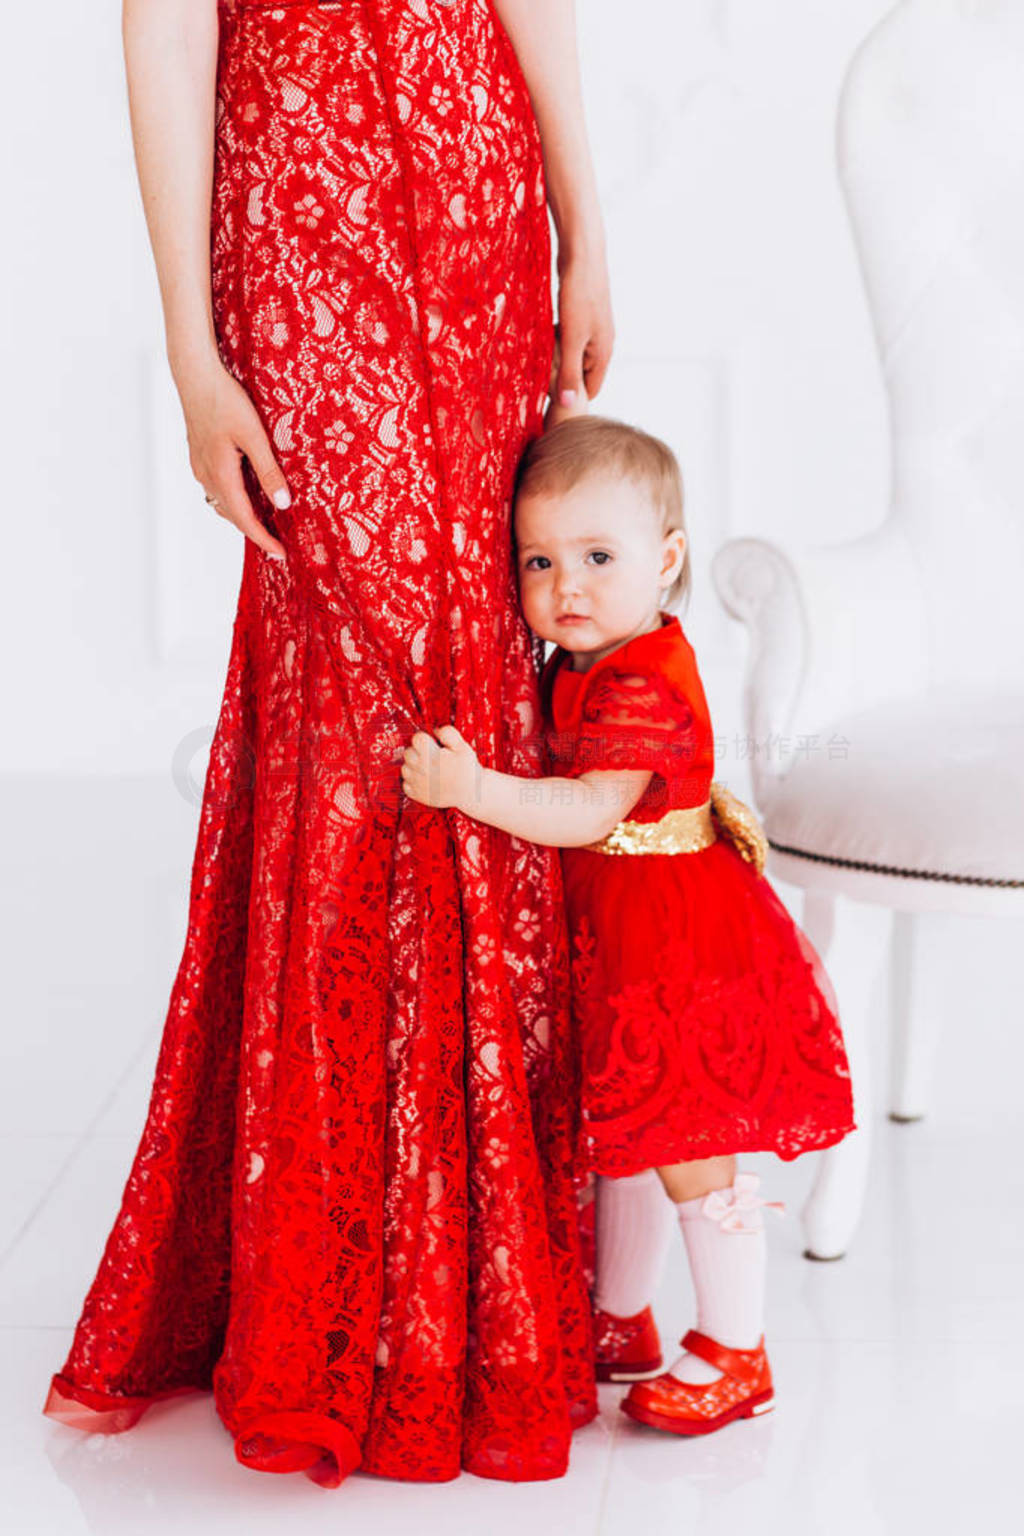 Nice, family, good photo of mother and daughter in red dresses i